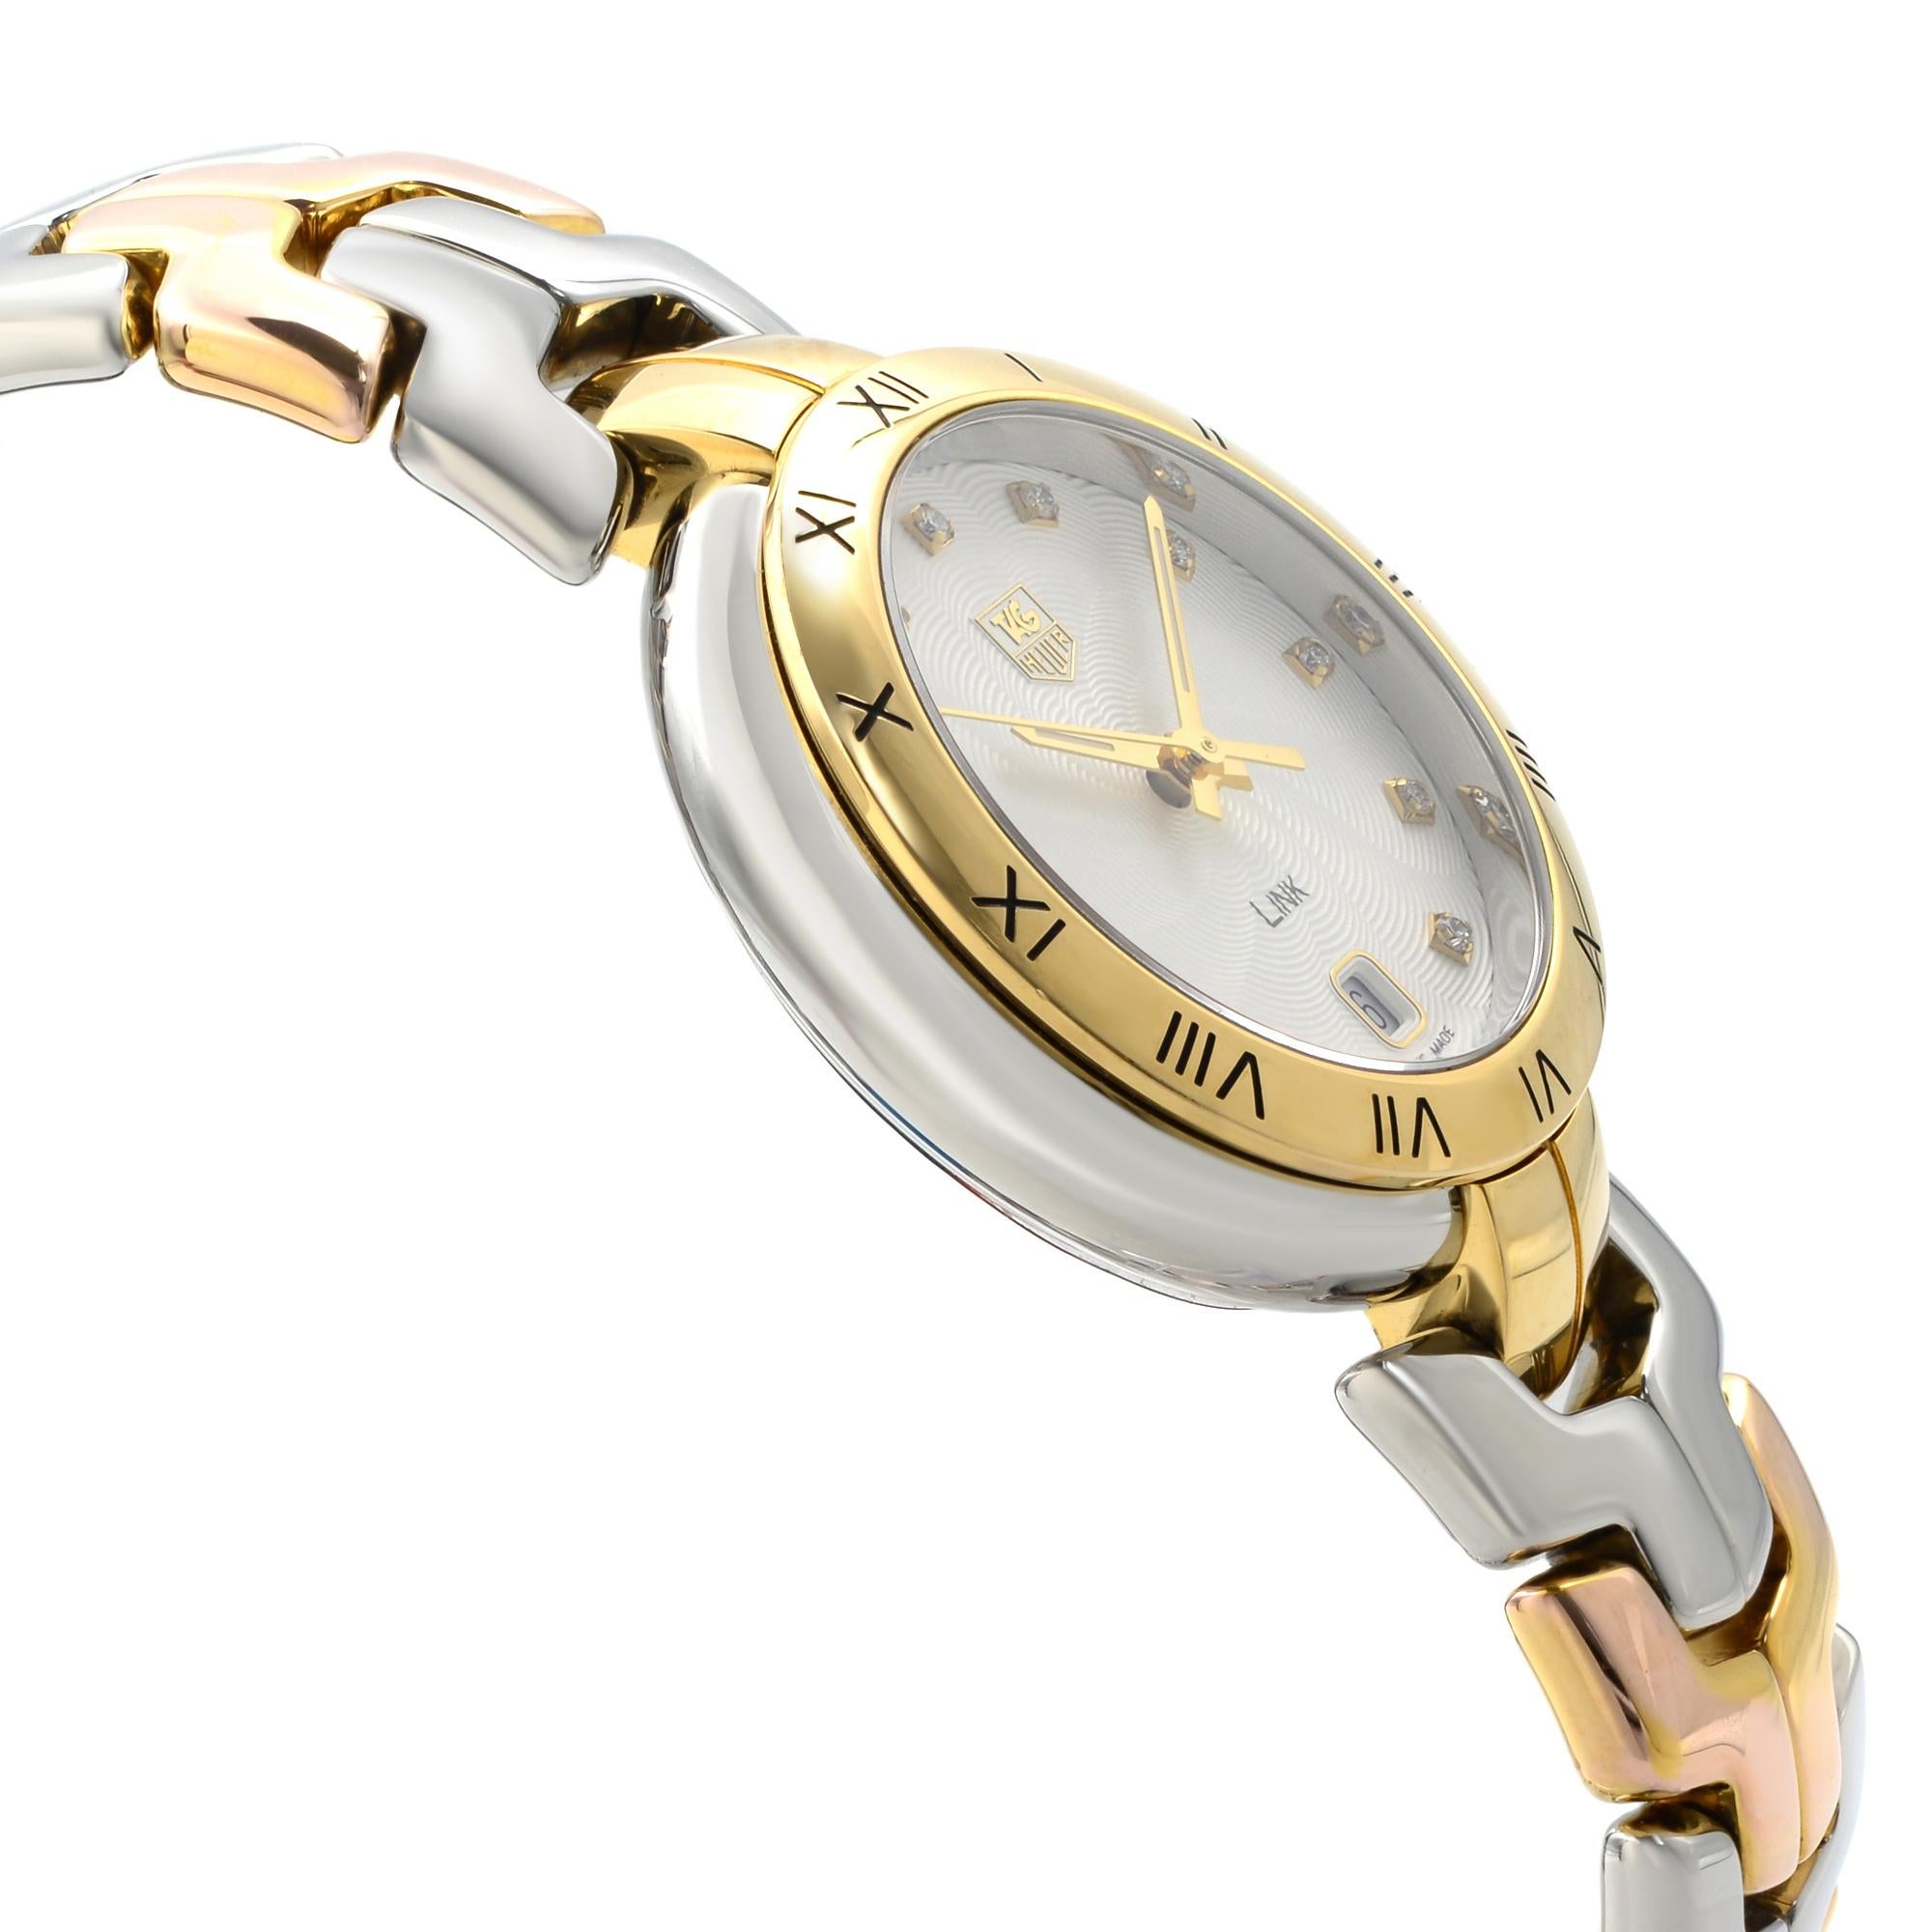 22k gold watches for women's